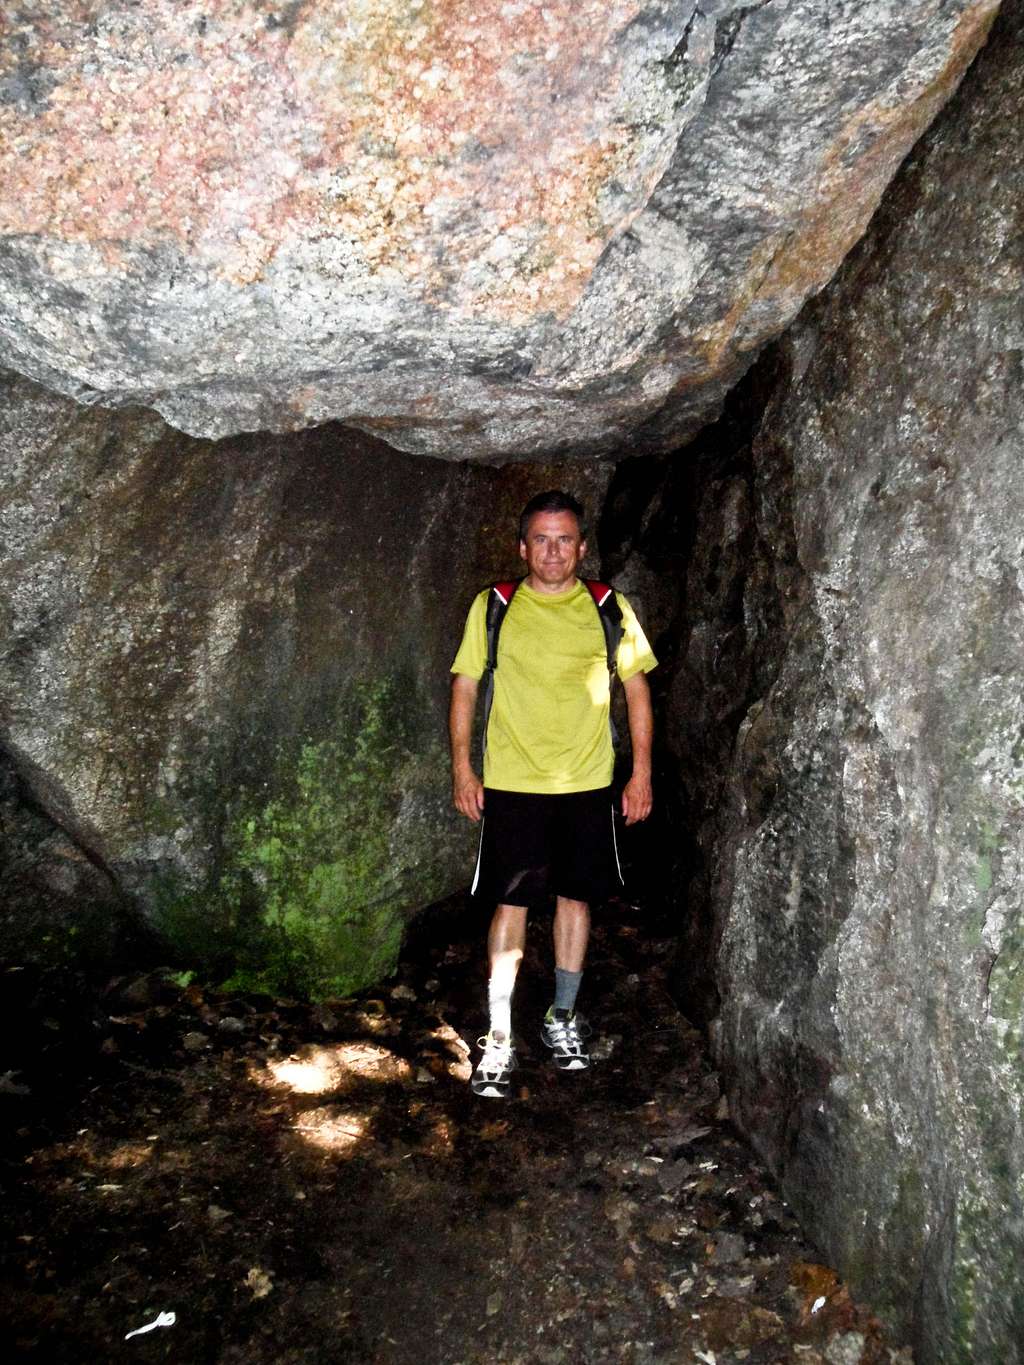 My Dad in the Cave